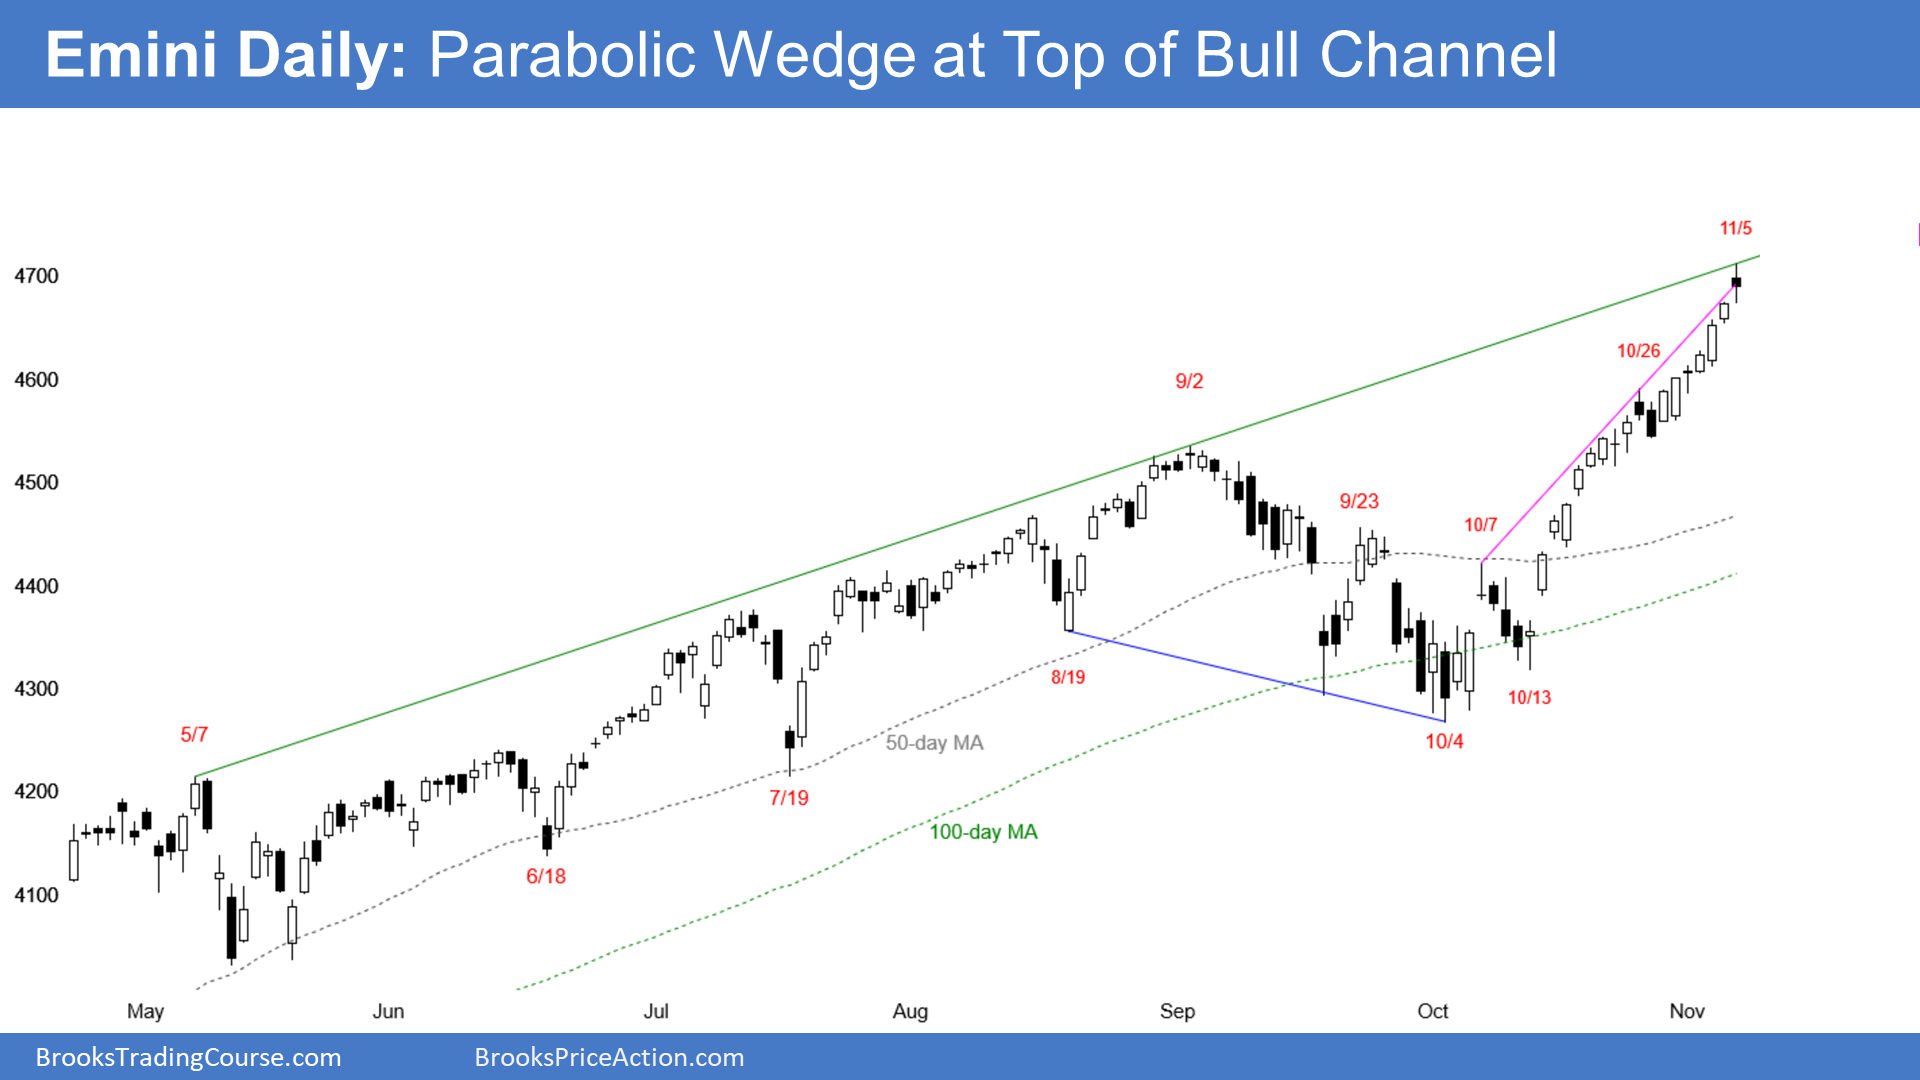 SP500 Emini parabolic wedge on daily candlestick chart at top of bull channel